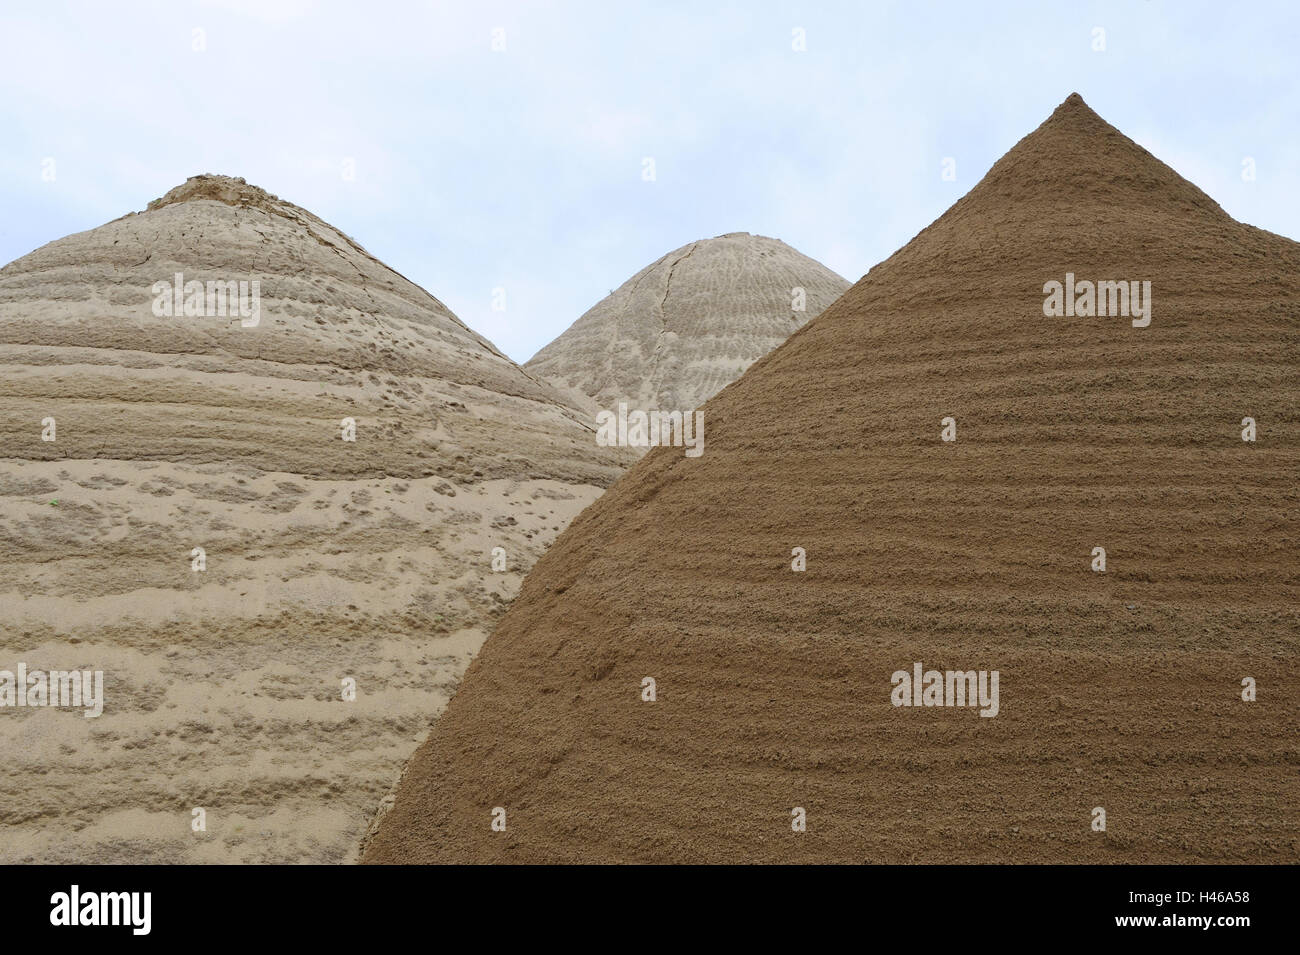 Sand hills, passed away, Sand heaps, Sand mountains, Sand, hill, heap, three, side by side, river sand, Grabsand, economy, building industry, Baggersand, piled up, colours, heavens, clouds, nobody, Stock Photo